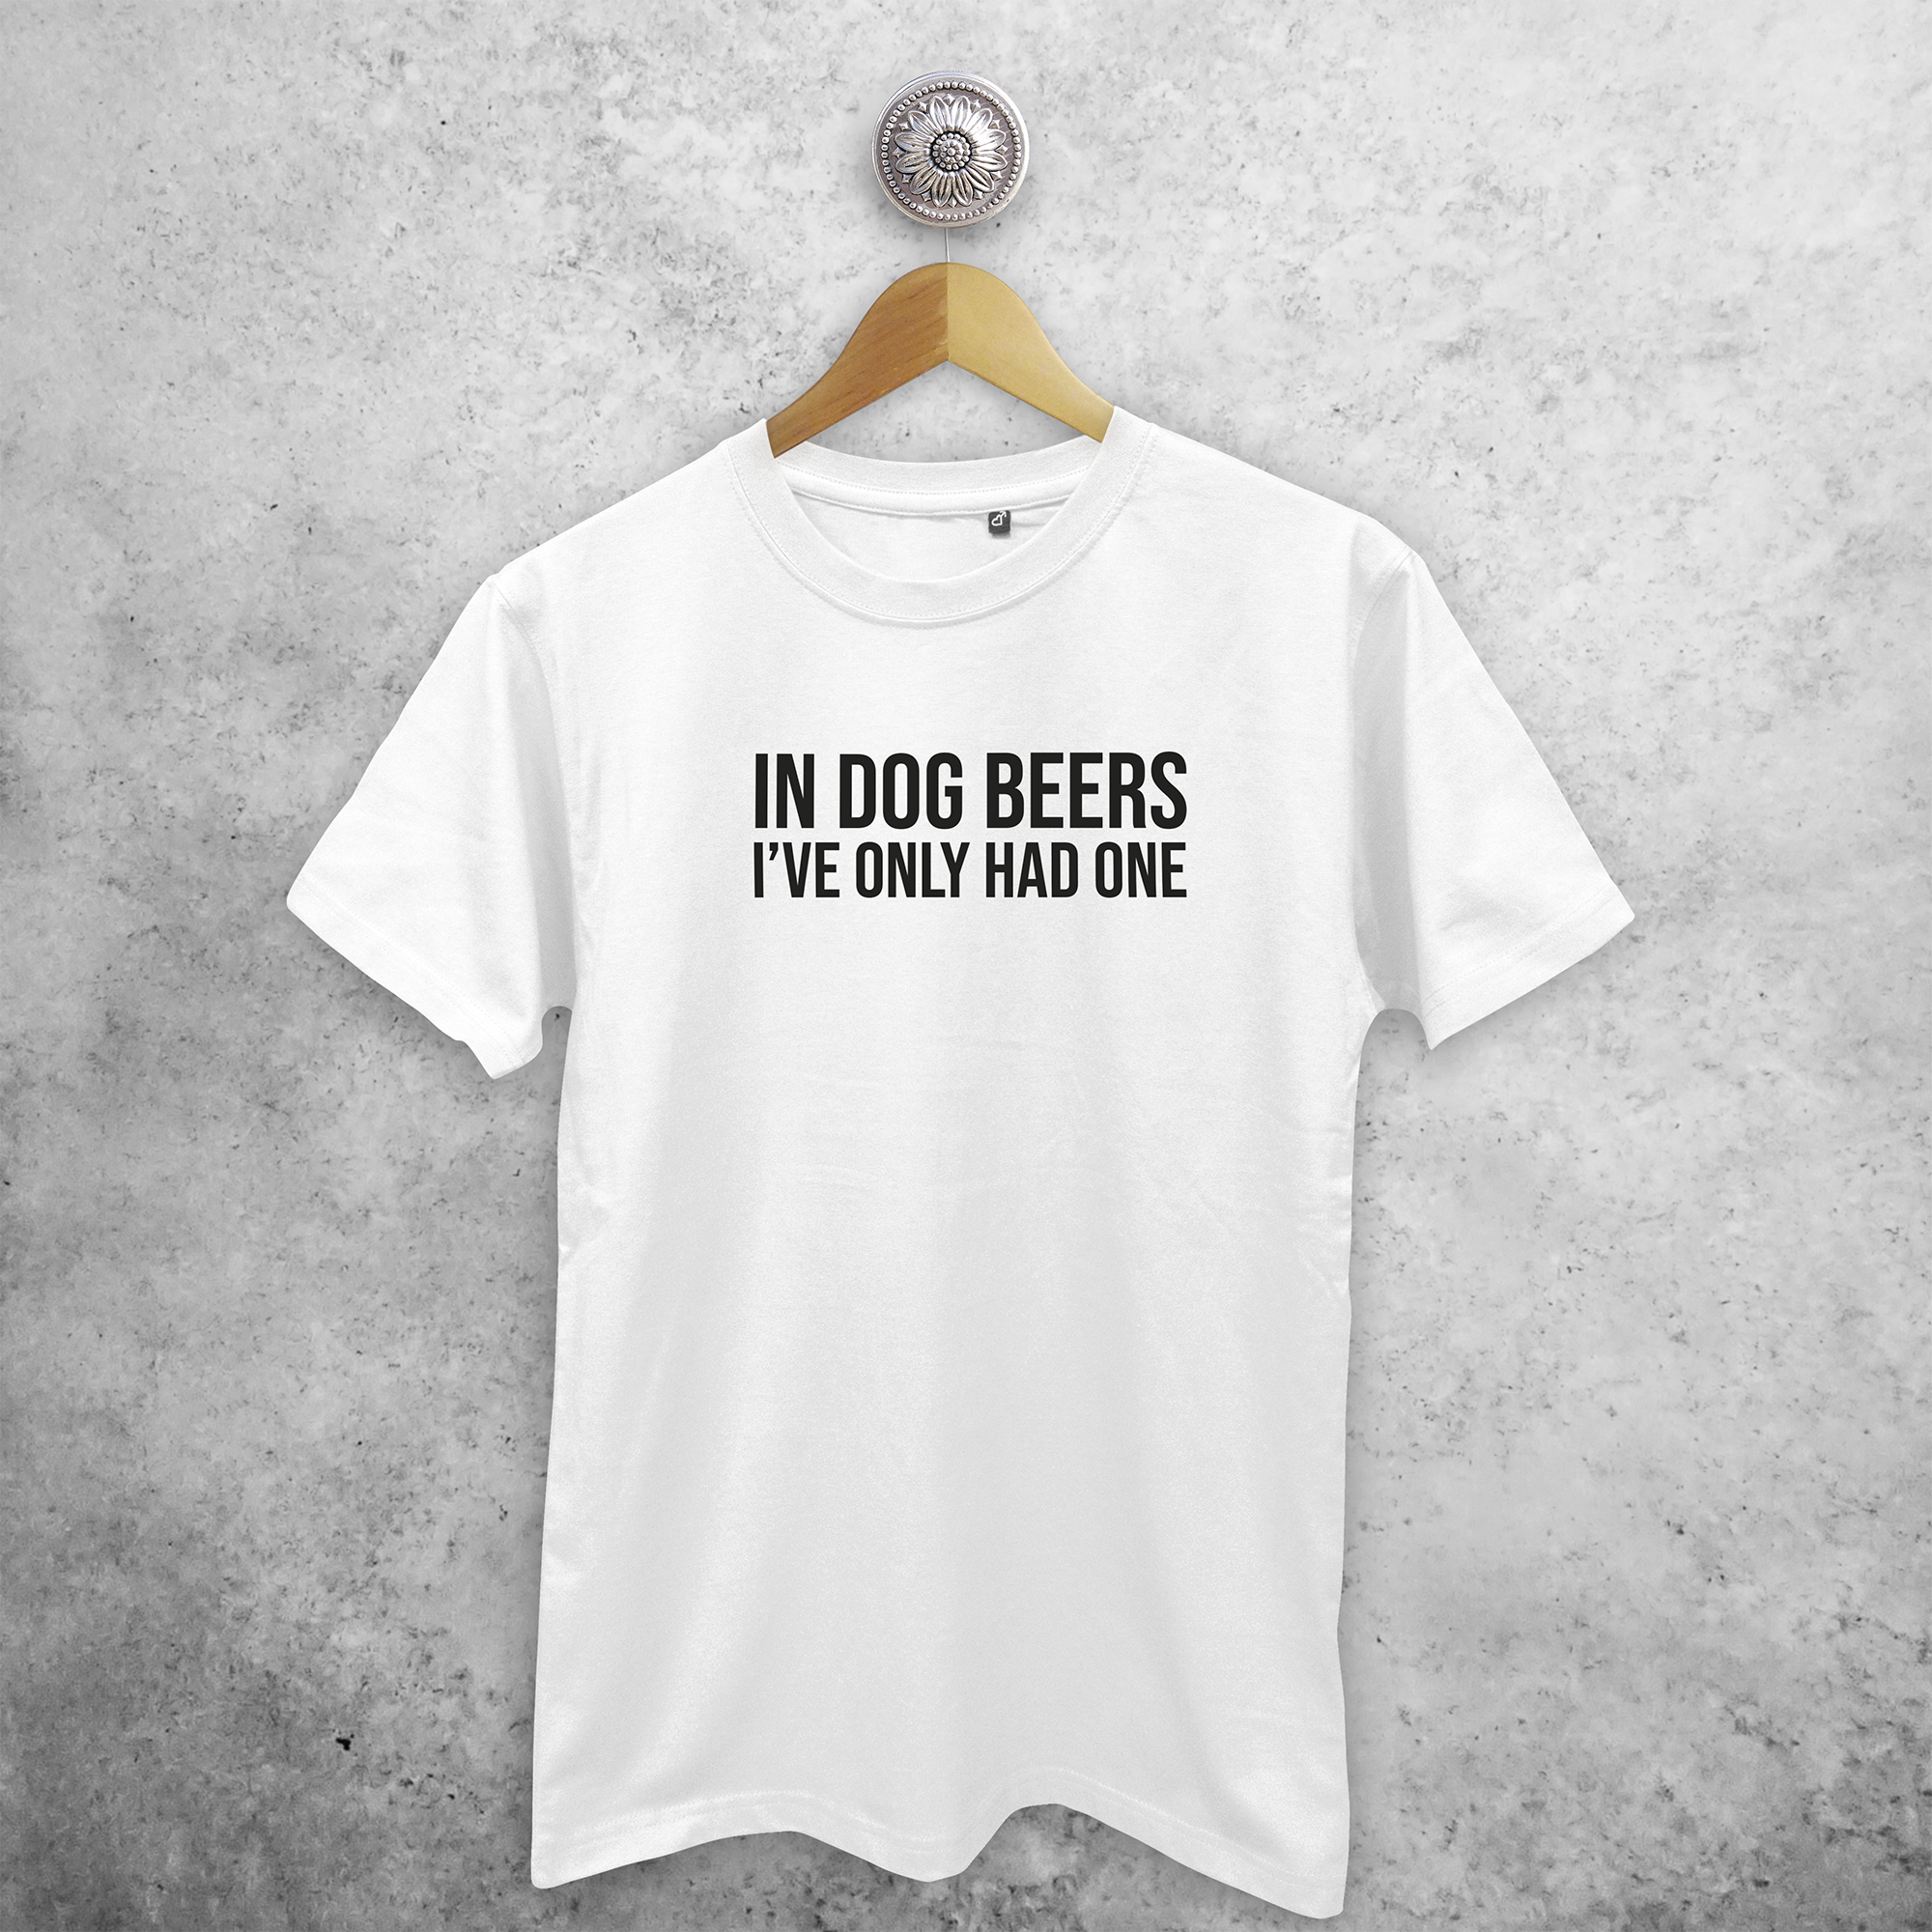 'In dog beers, I've only had one' volwassene shirt